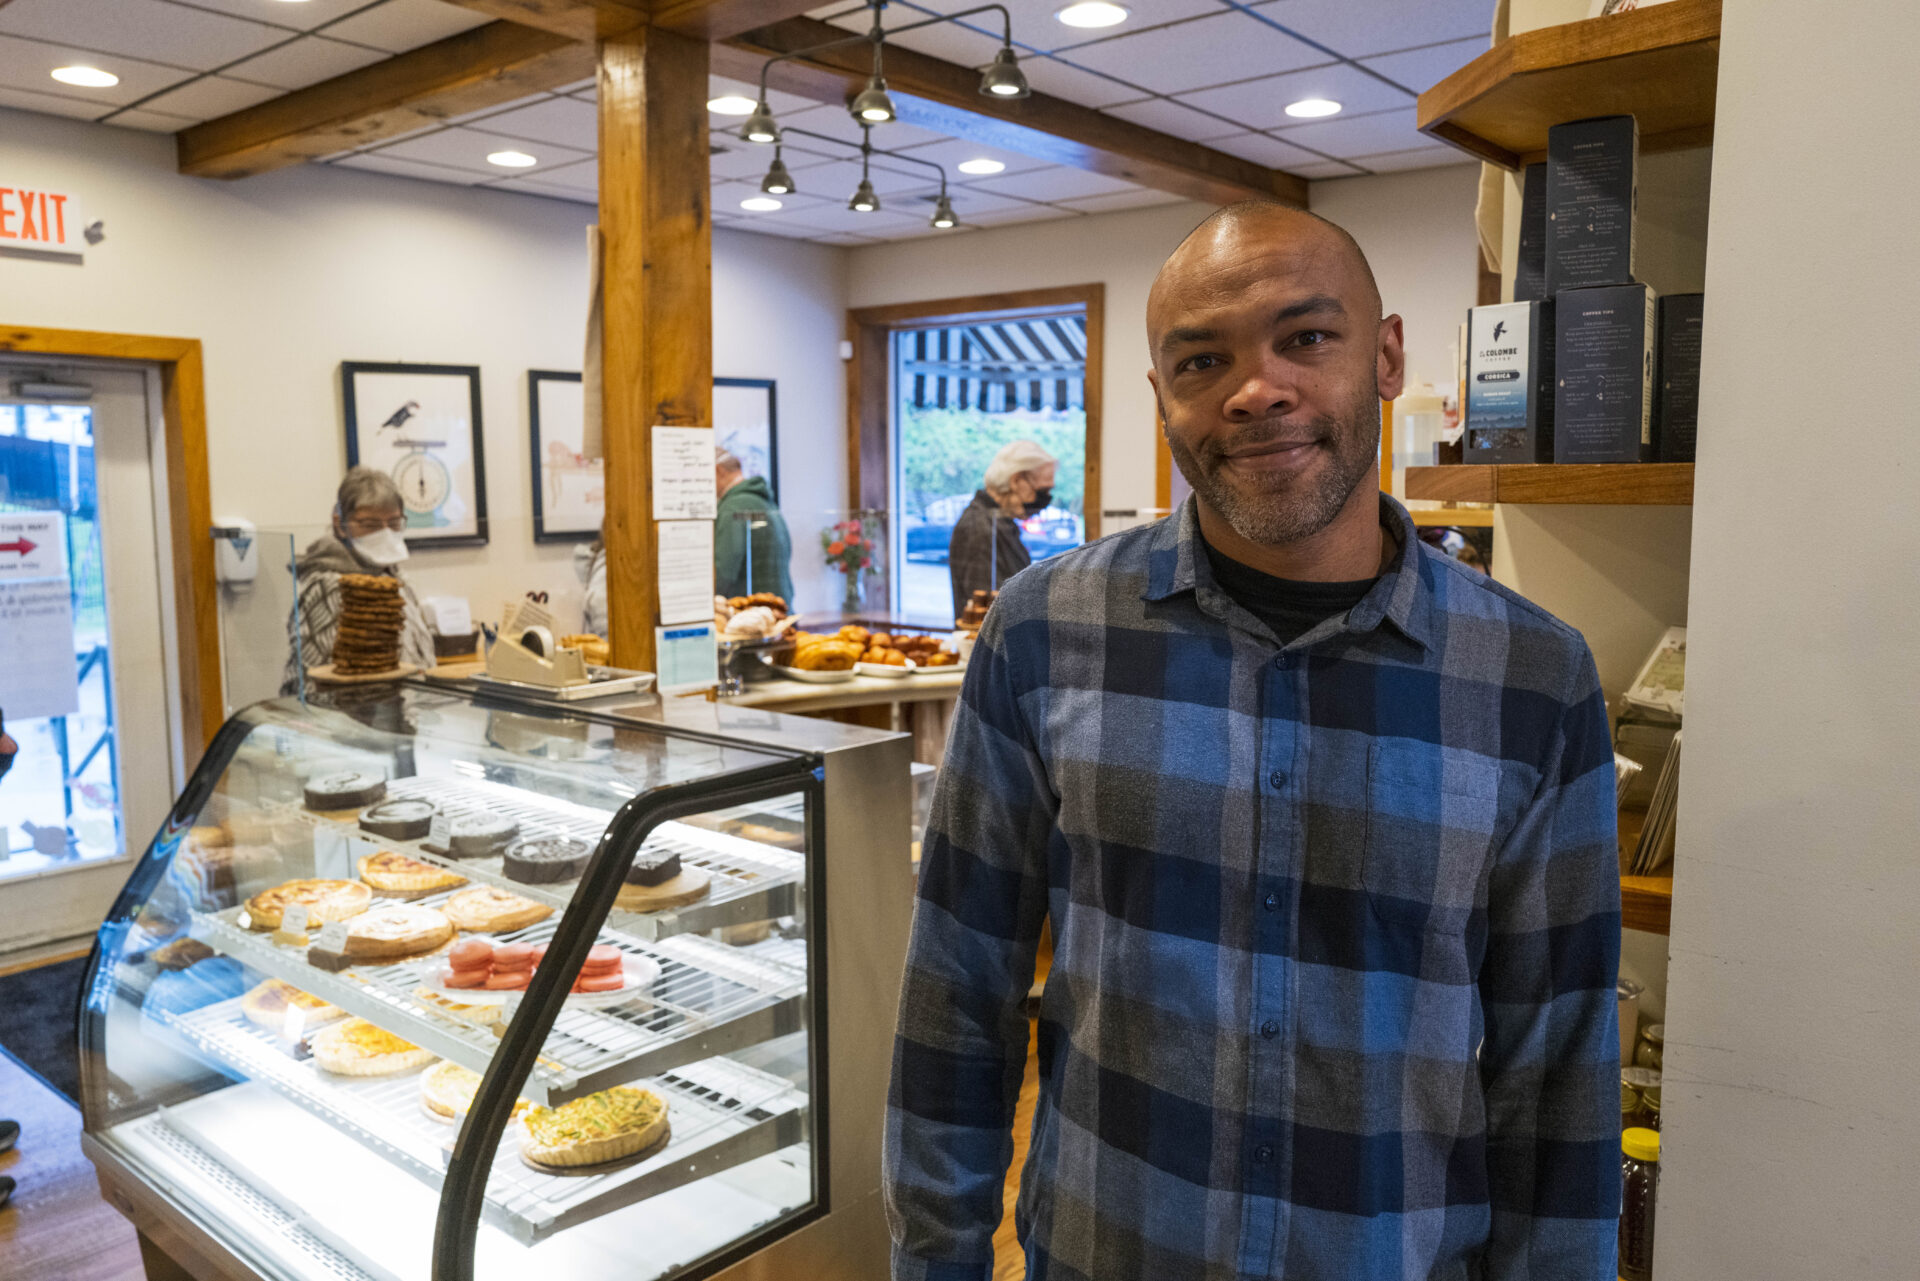 Owner standing proudly in front of beautiful pastry case